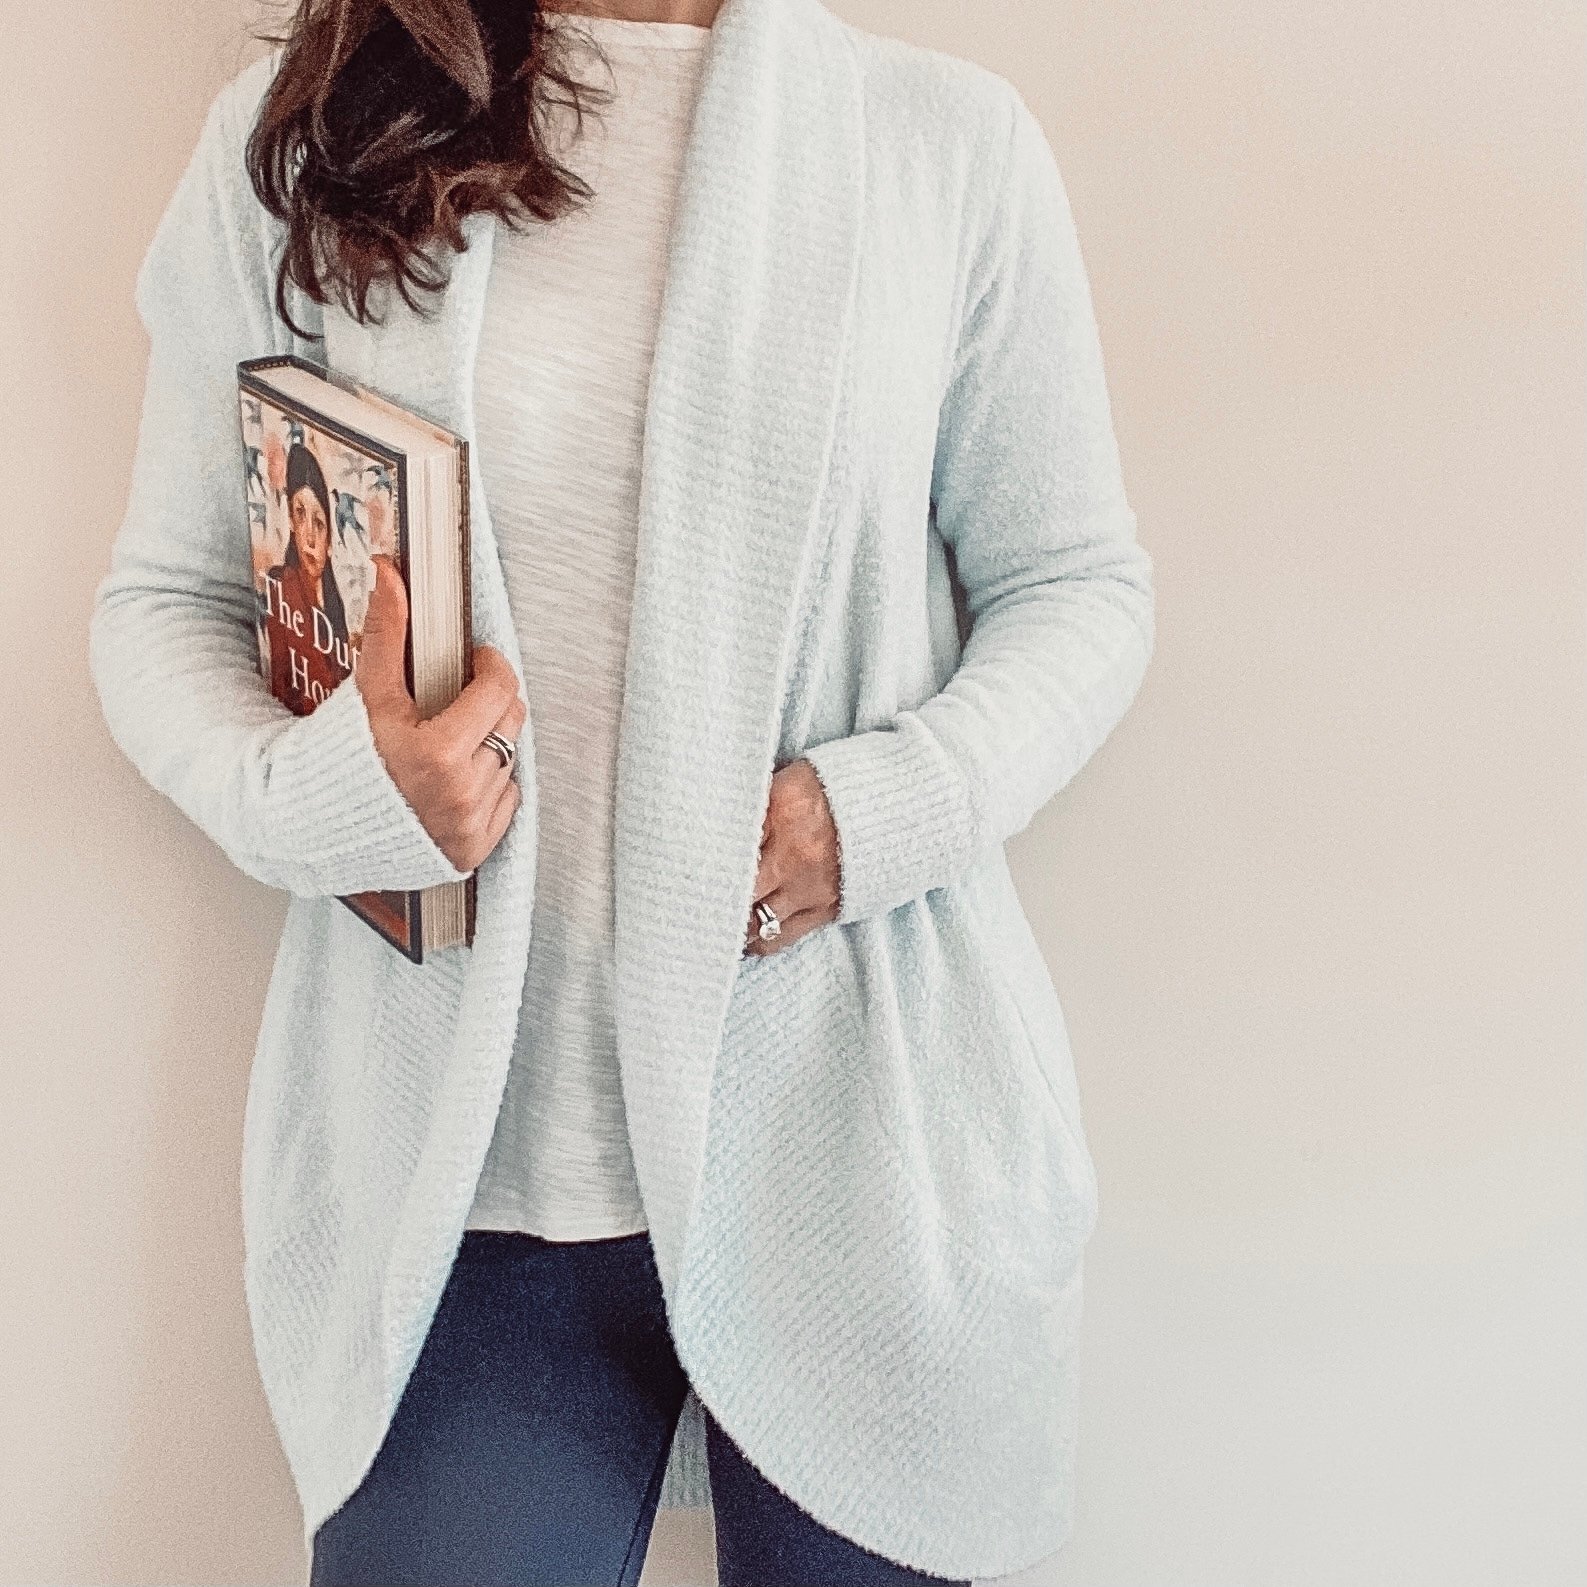 Barefoot Dreams cardigan sweater and book